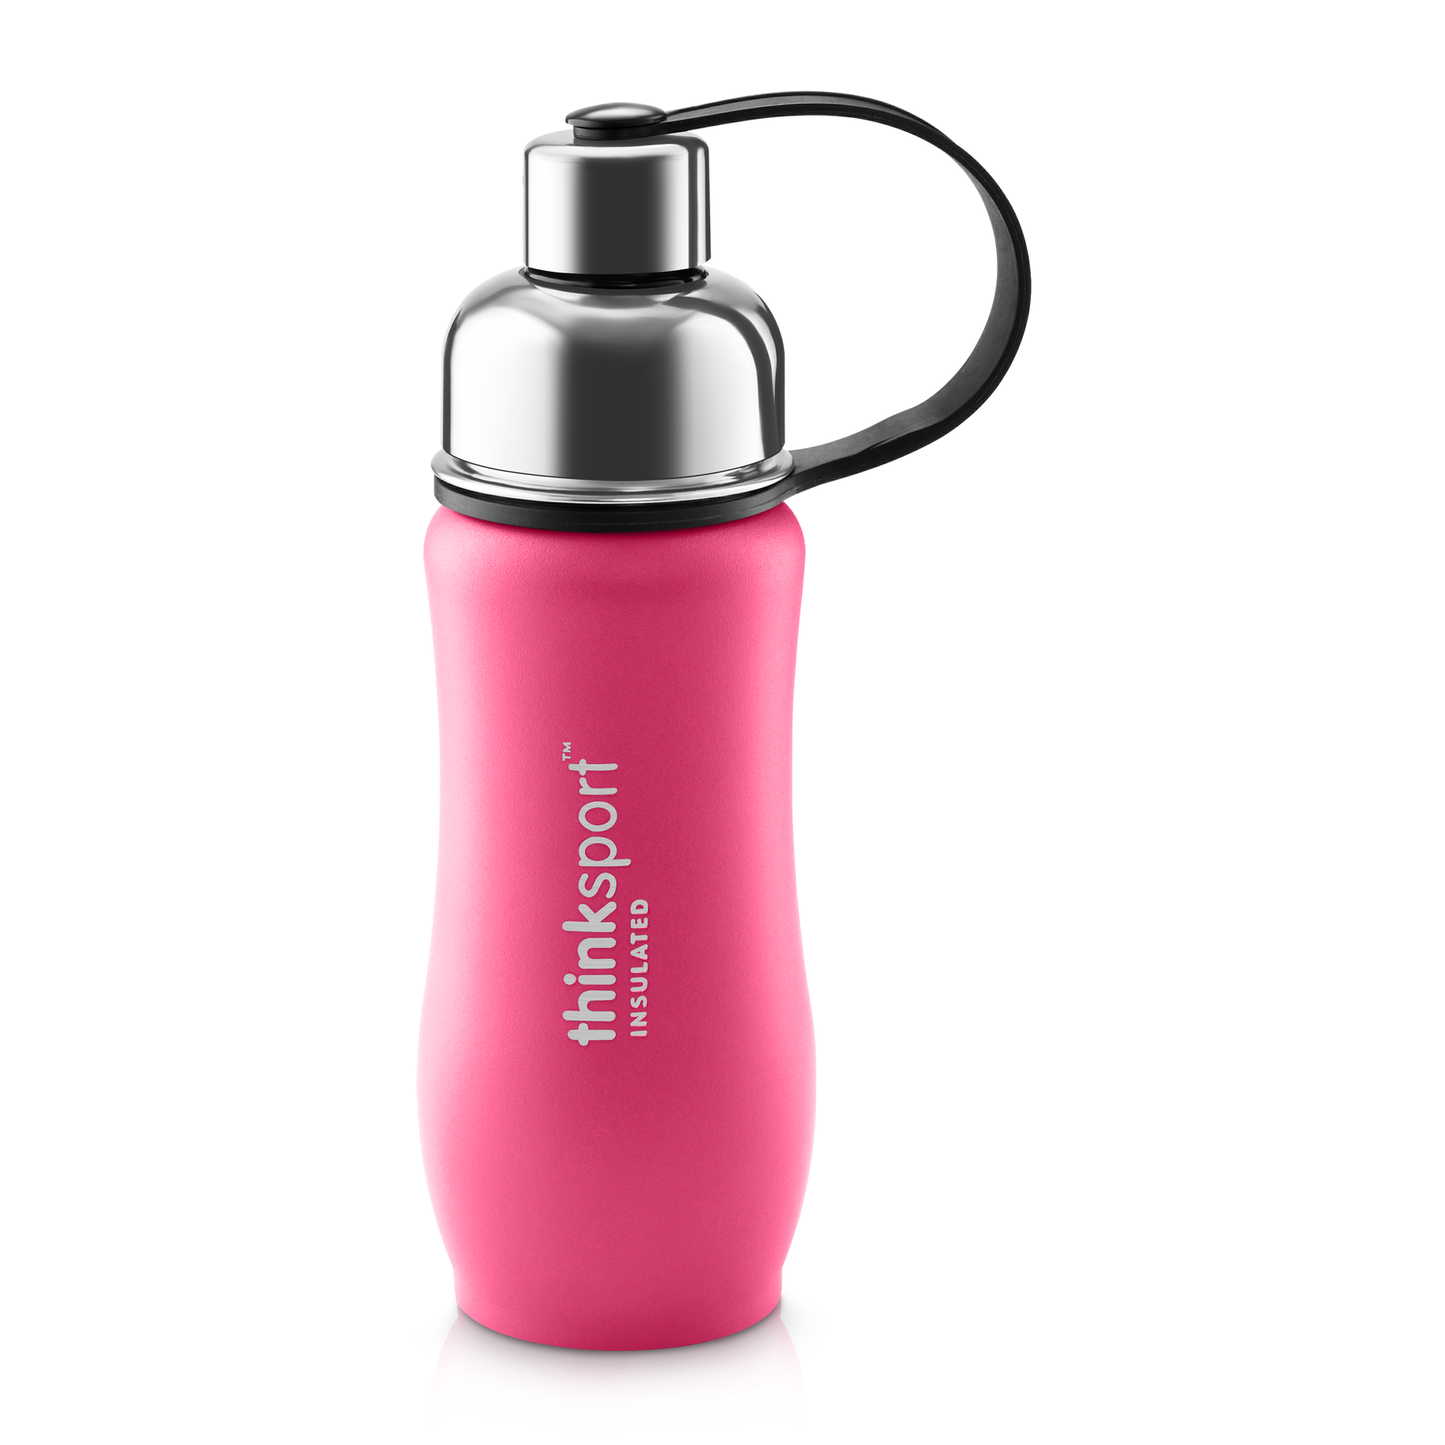 Hot Pink Insulated Sports Bottle 17oz Stainless Steel, Perfect for Hot and Cold Beverages